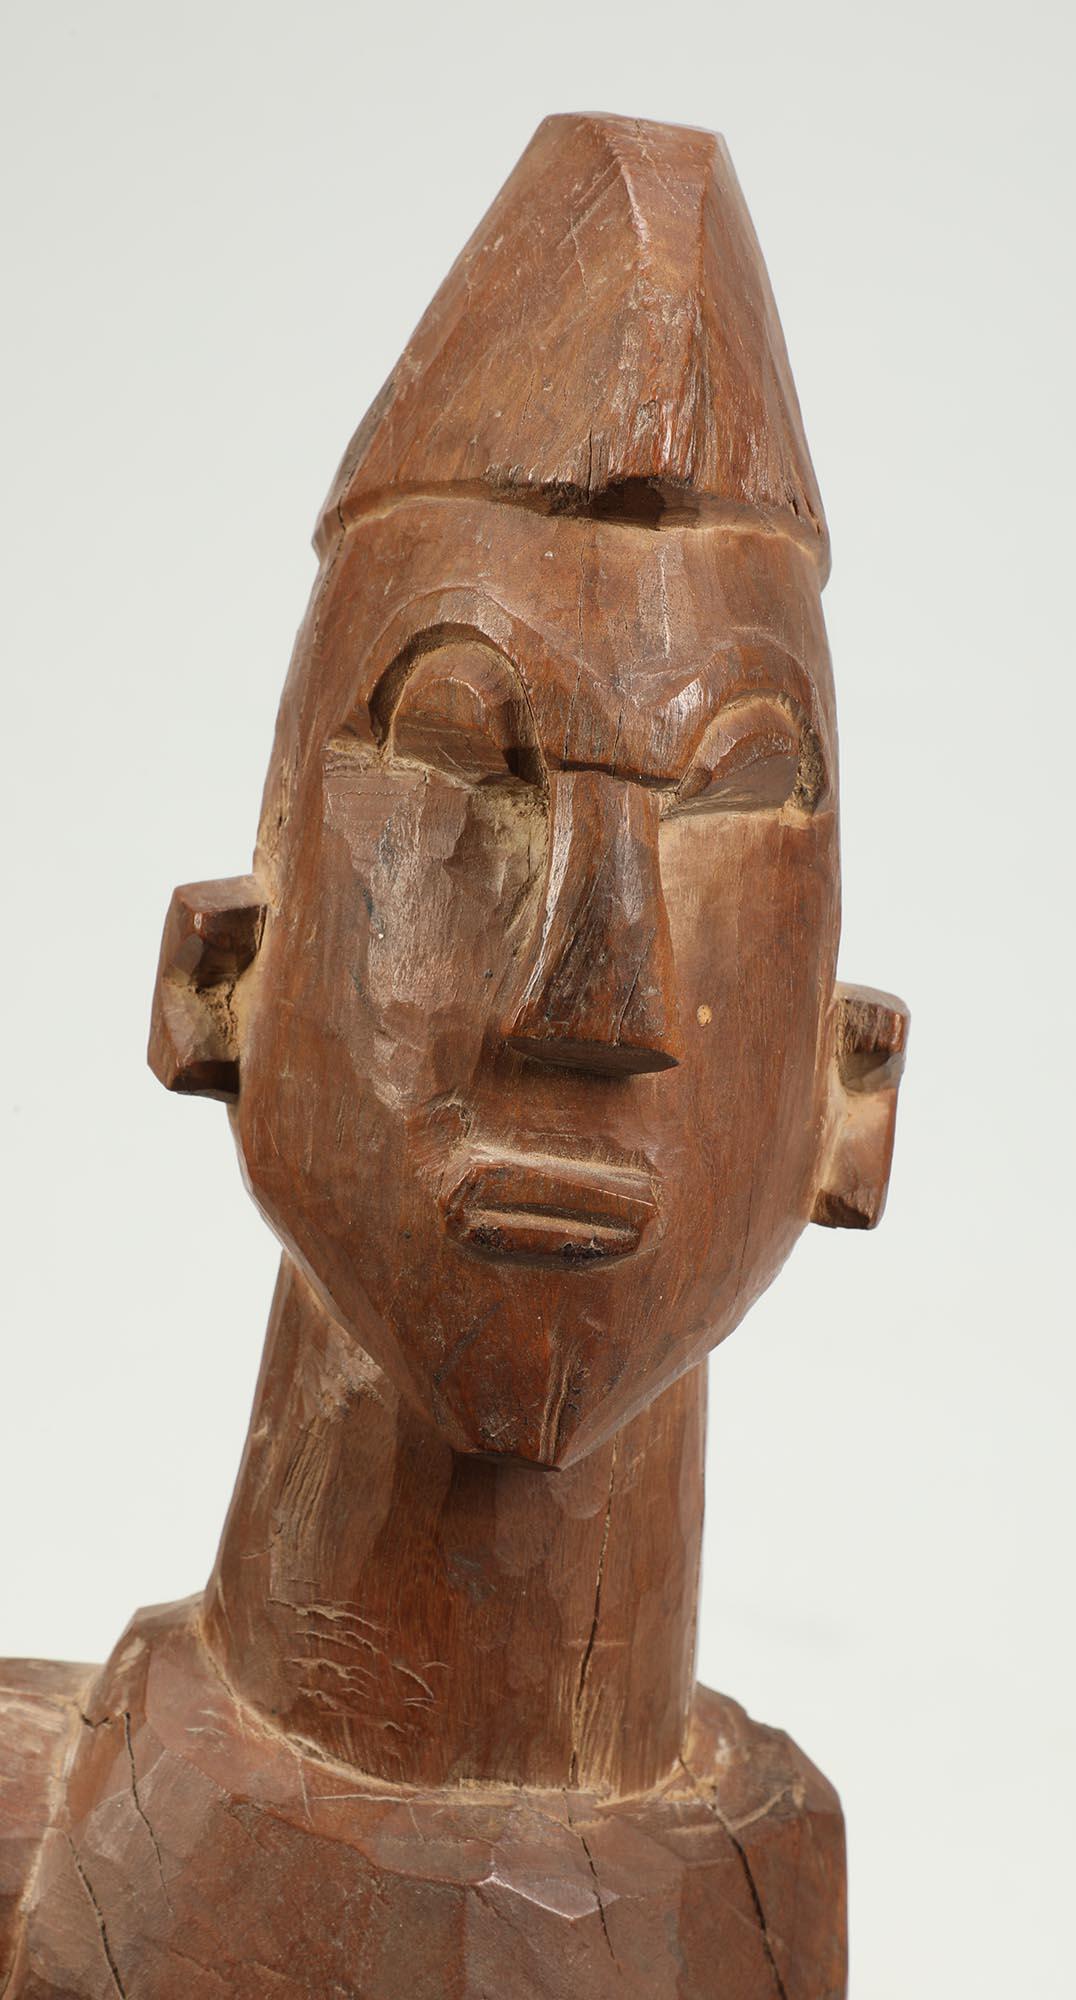 Finely carved large geometric figure from the Lobi, of Ghana and Burkina Faso, dating from the early to mid-20th century. It has a captivating intense gaze and one arm folded on chest, and other arm out to the side. Carved from very hard wood, Some